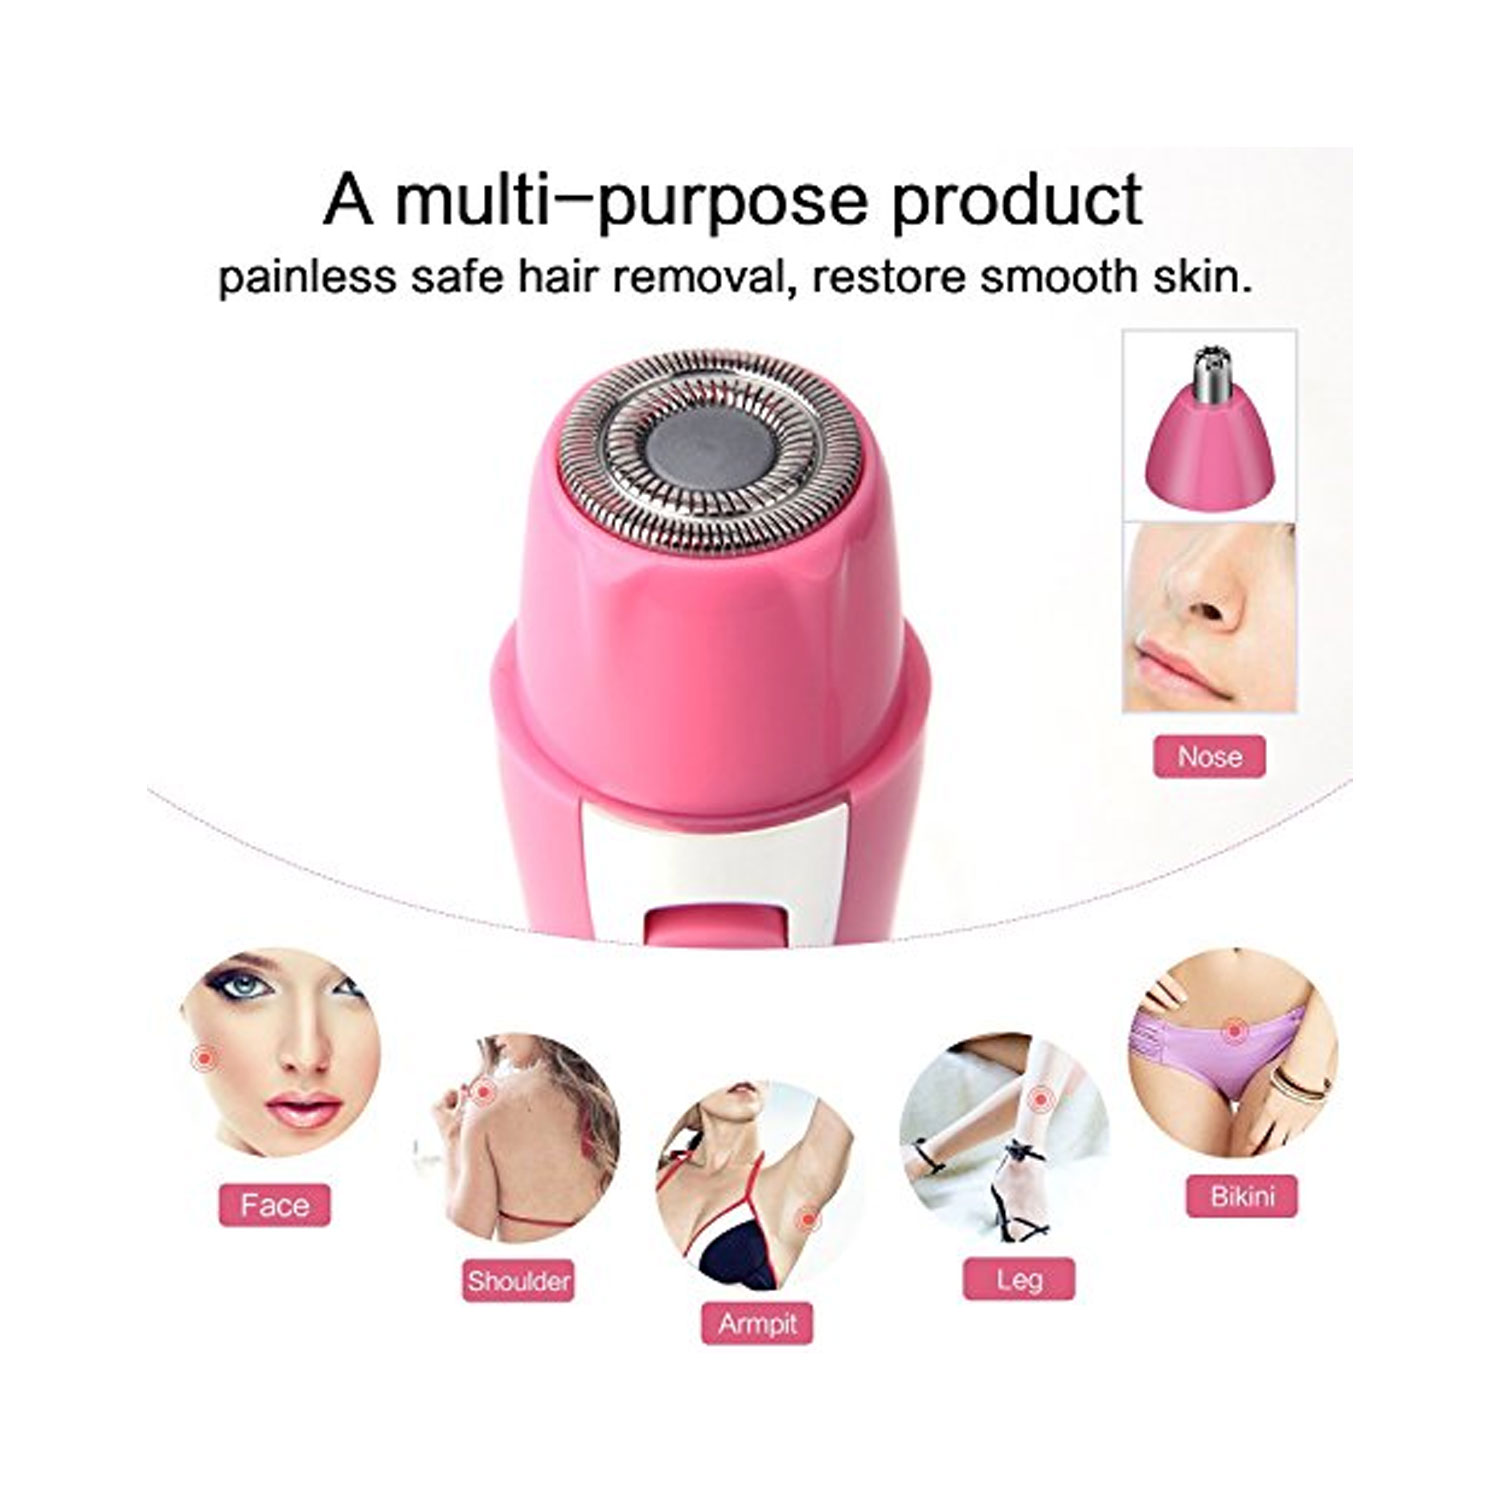 2 In 1 Premium Painless Facial Hair Removal For Women